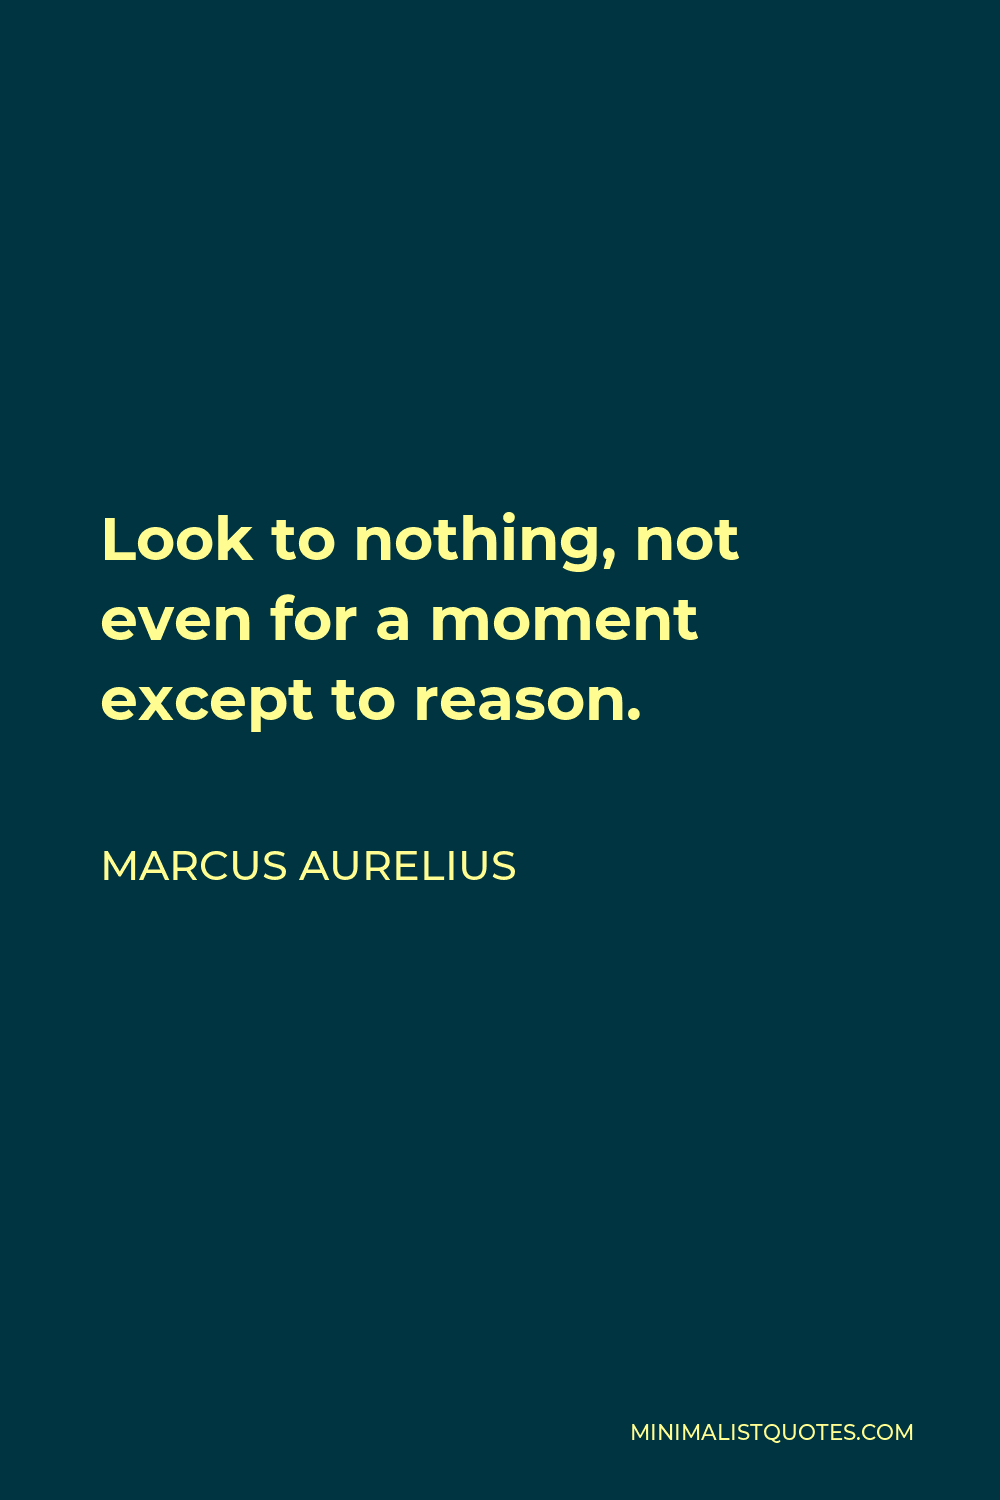 Marcus Aurelius Quote - Look to nothing, not even for a moment except to reason.